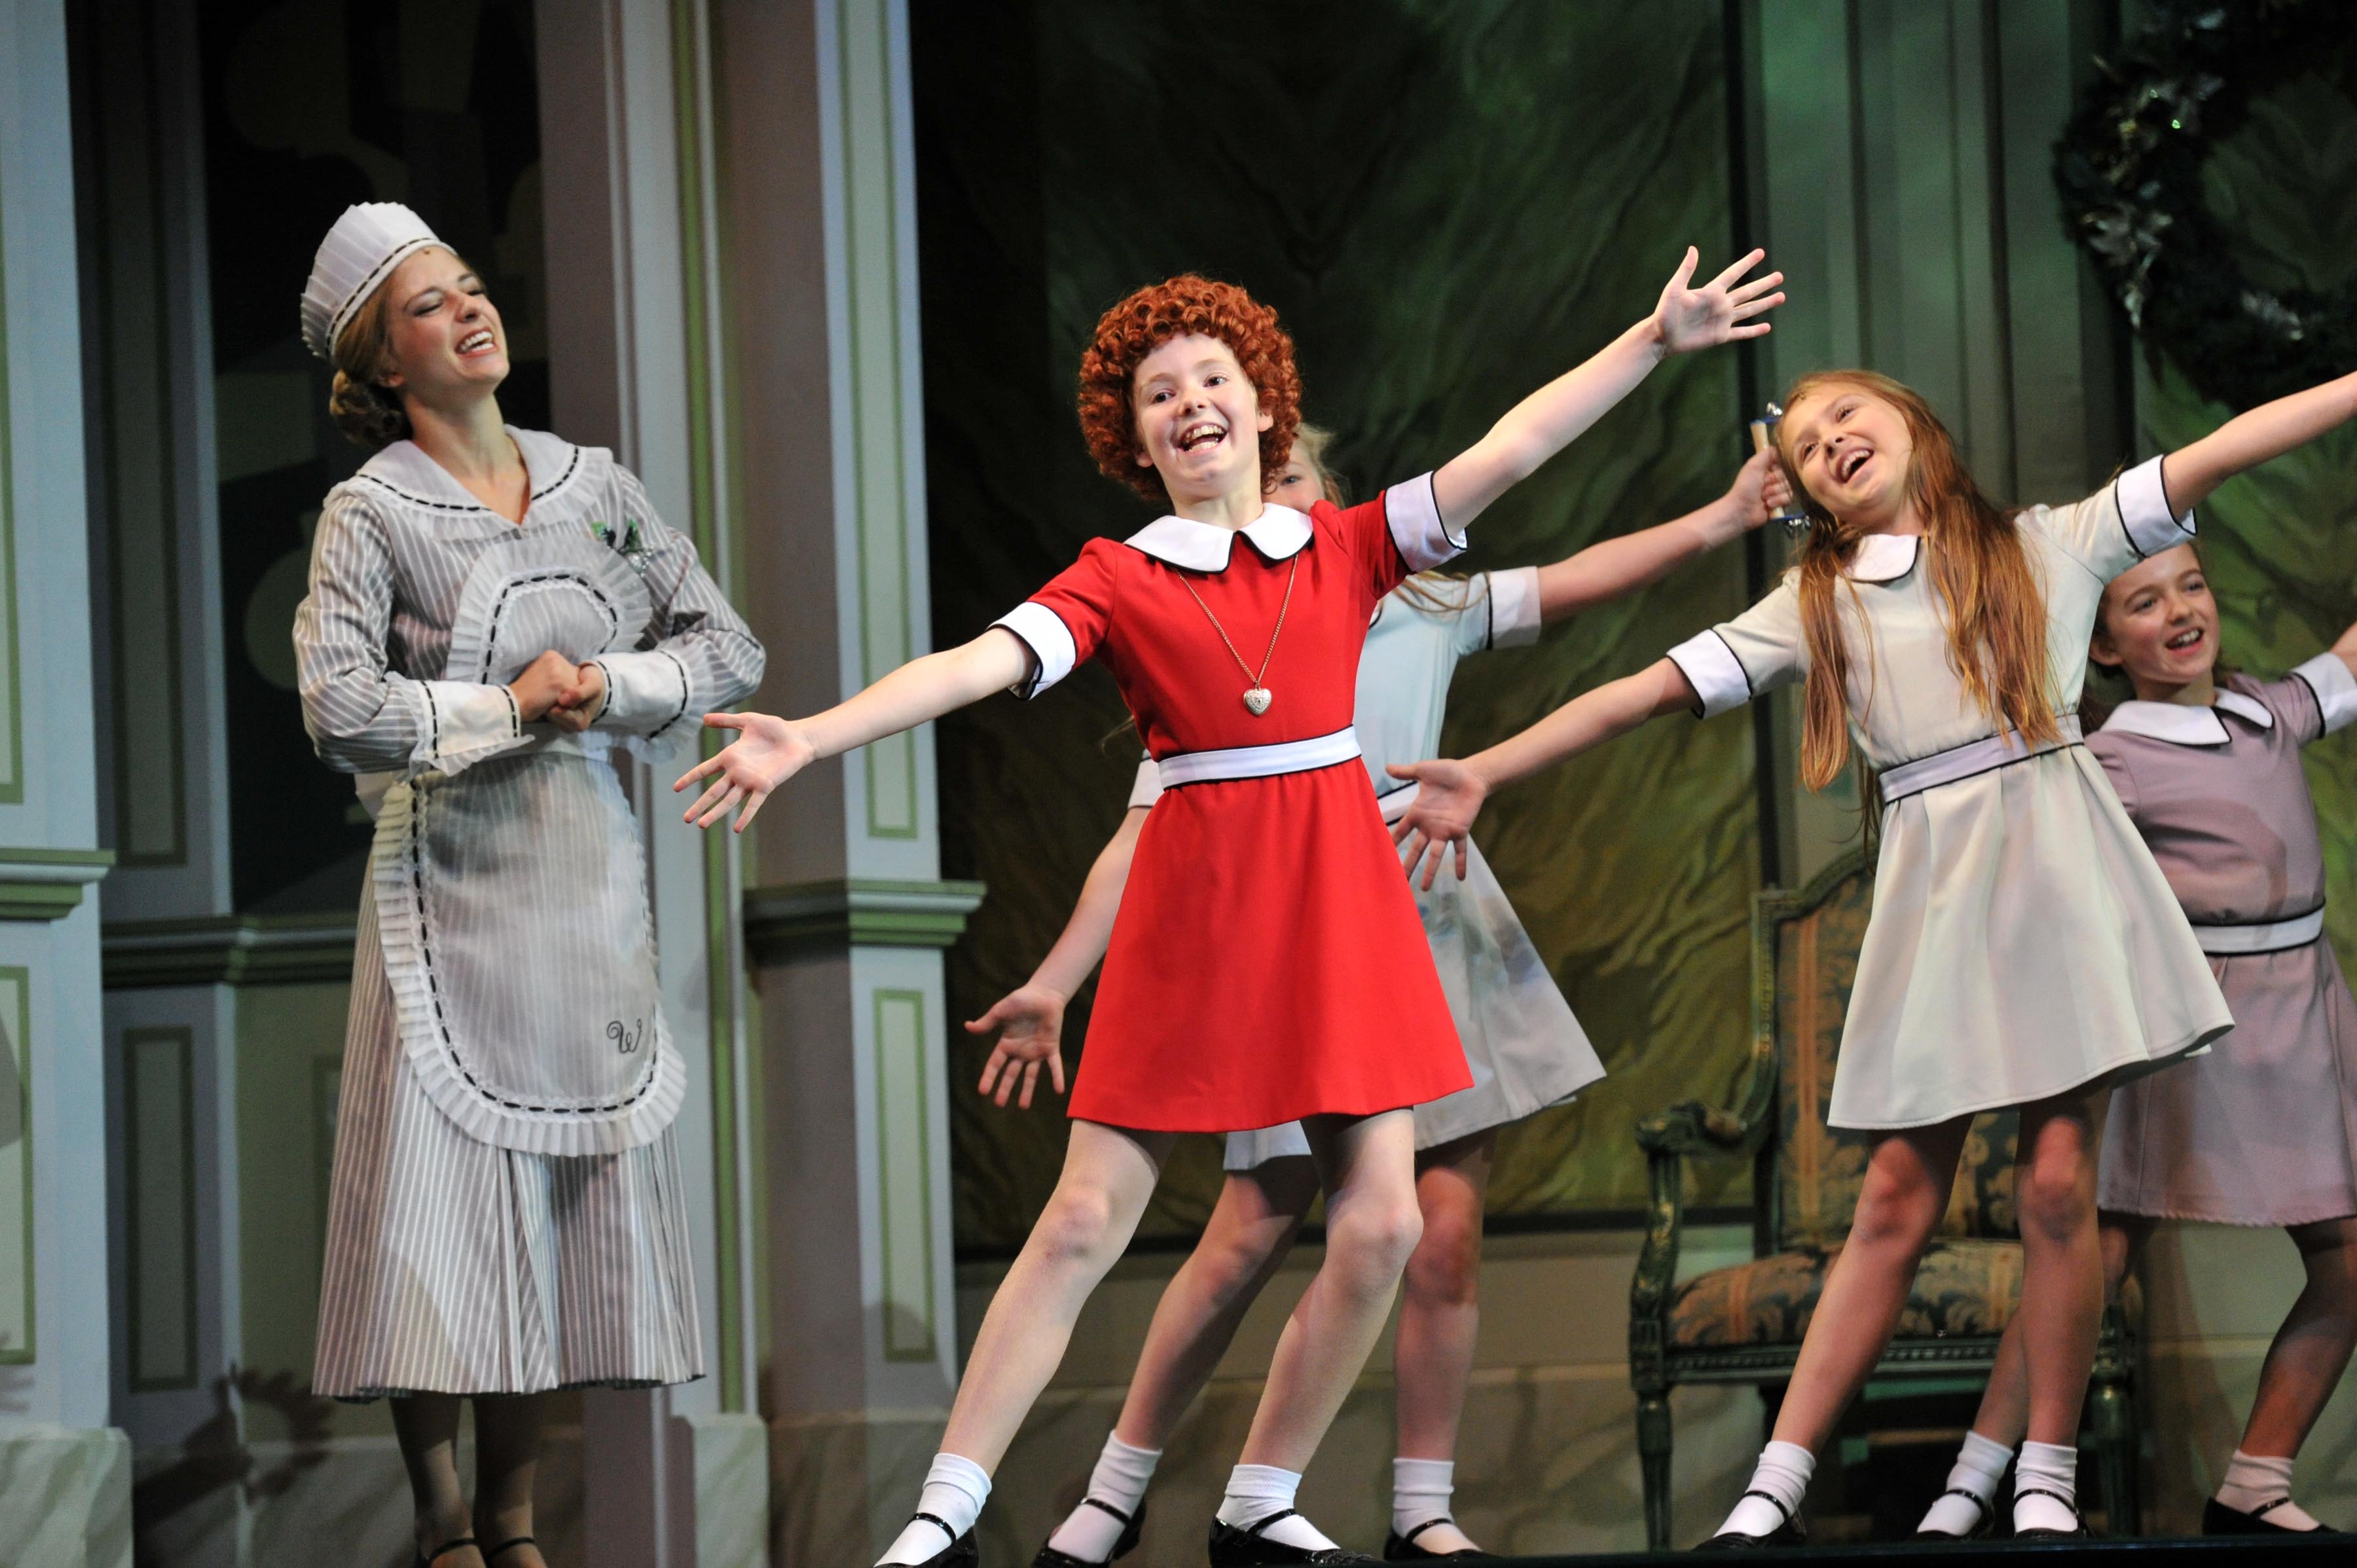 Ccs To Present Annie The Musical The Andalusia Star News The Andalusia Star News